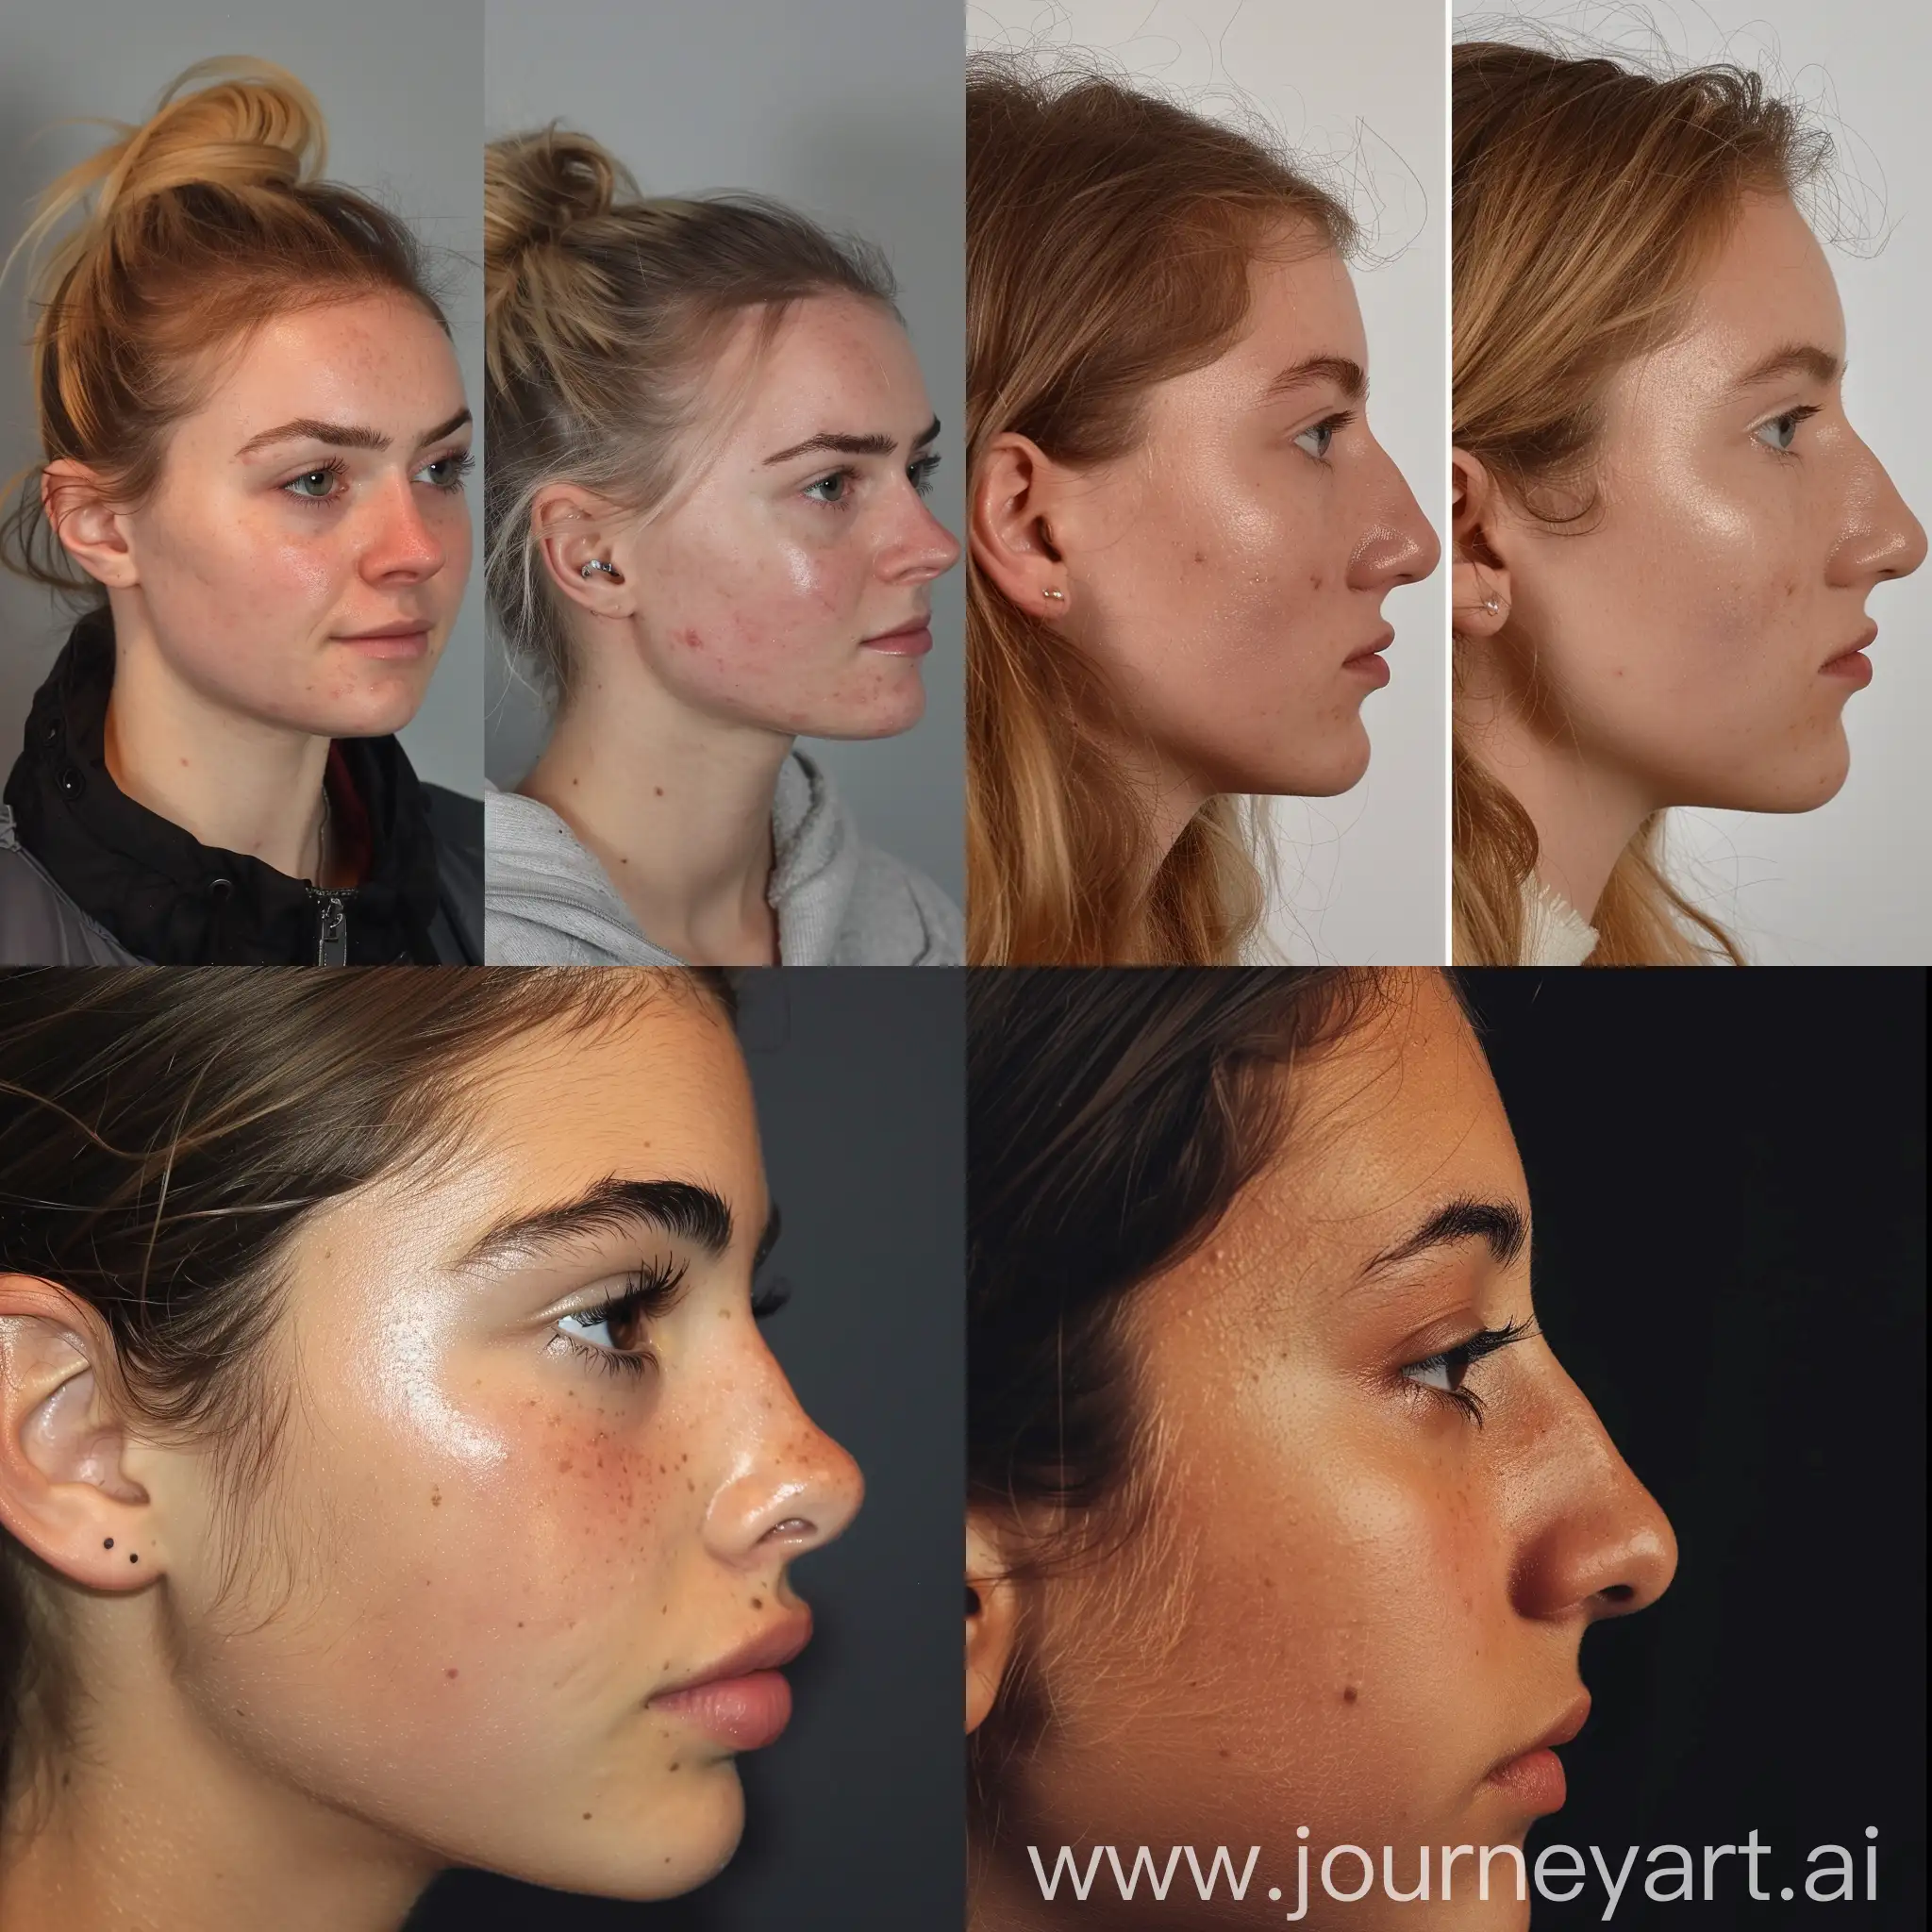 Before-and-After-Rhinoplasty-Surgery-Transformation